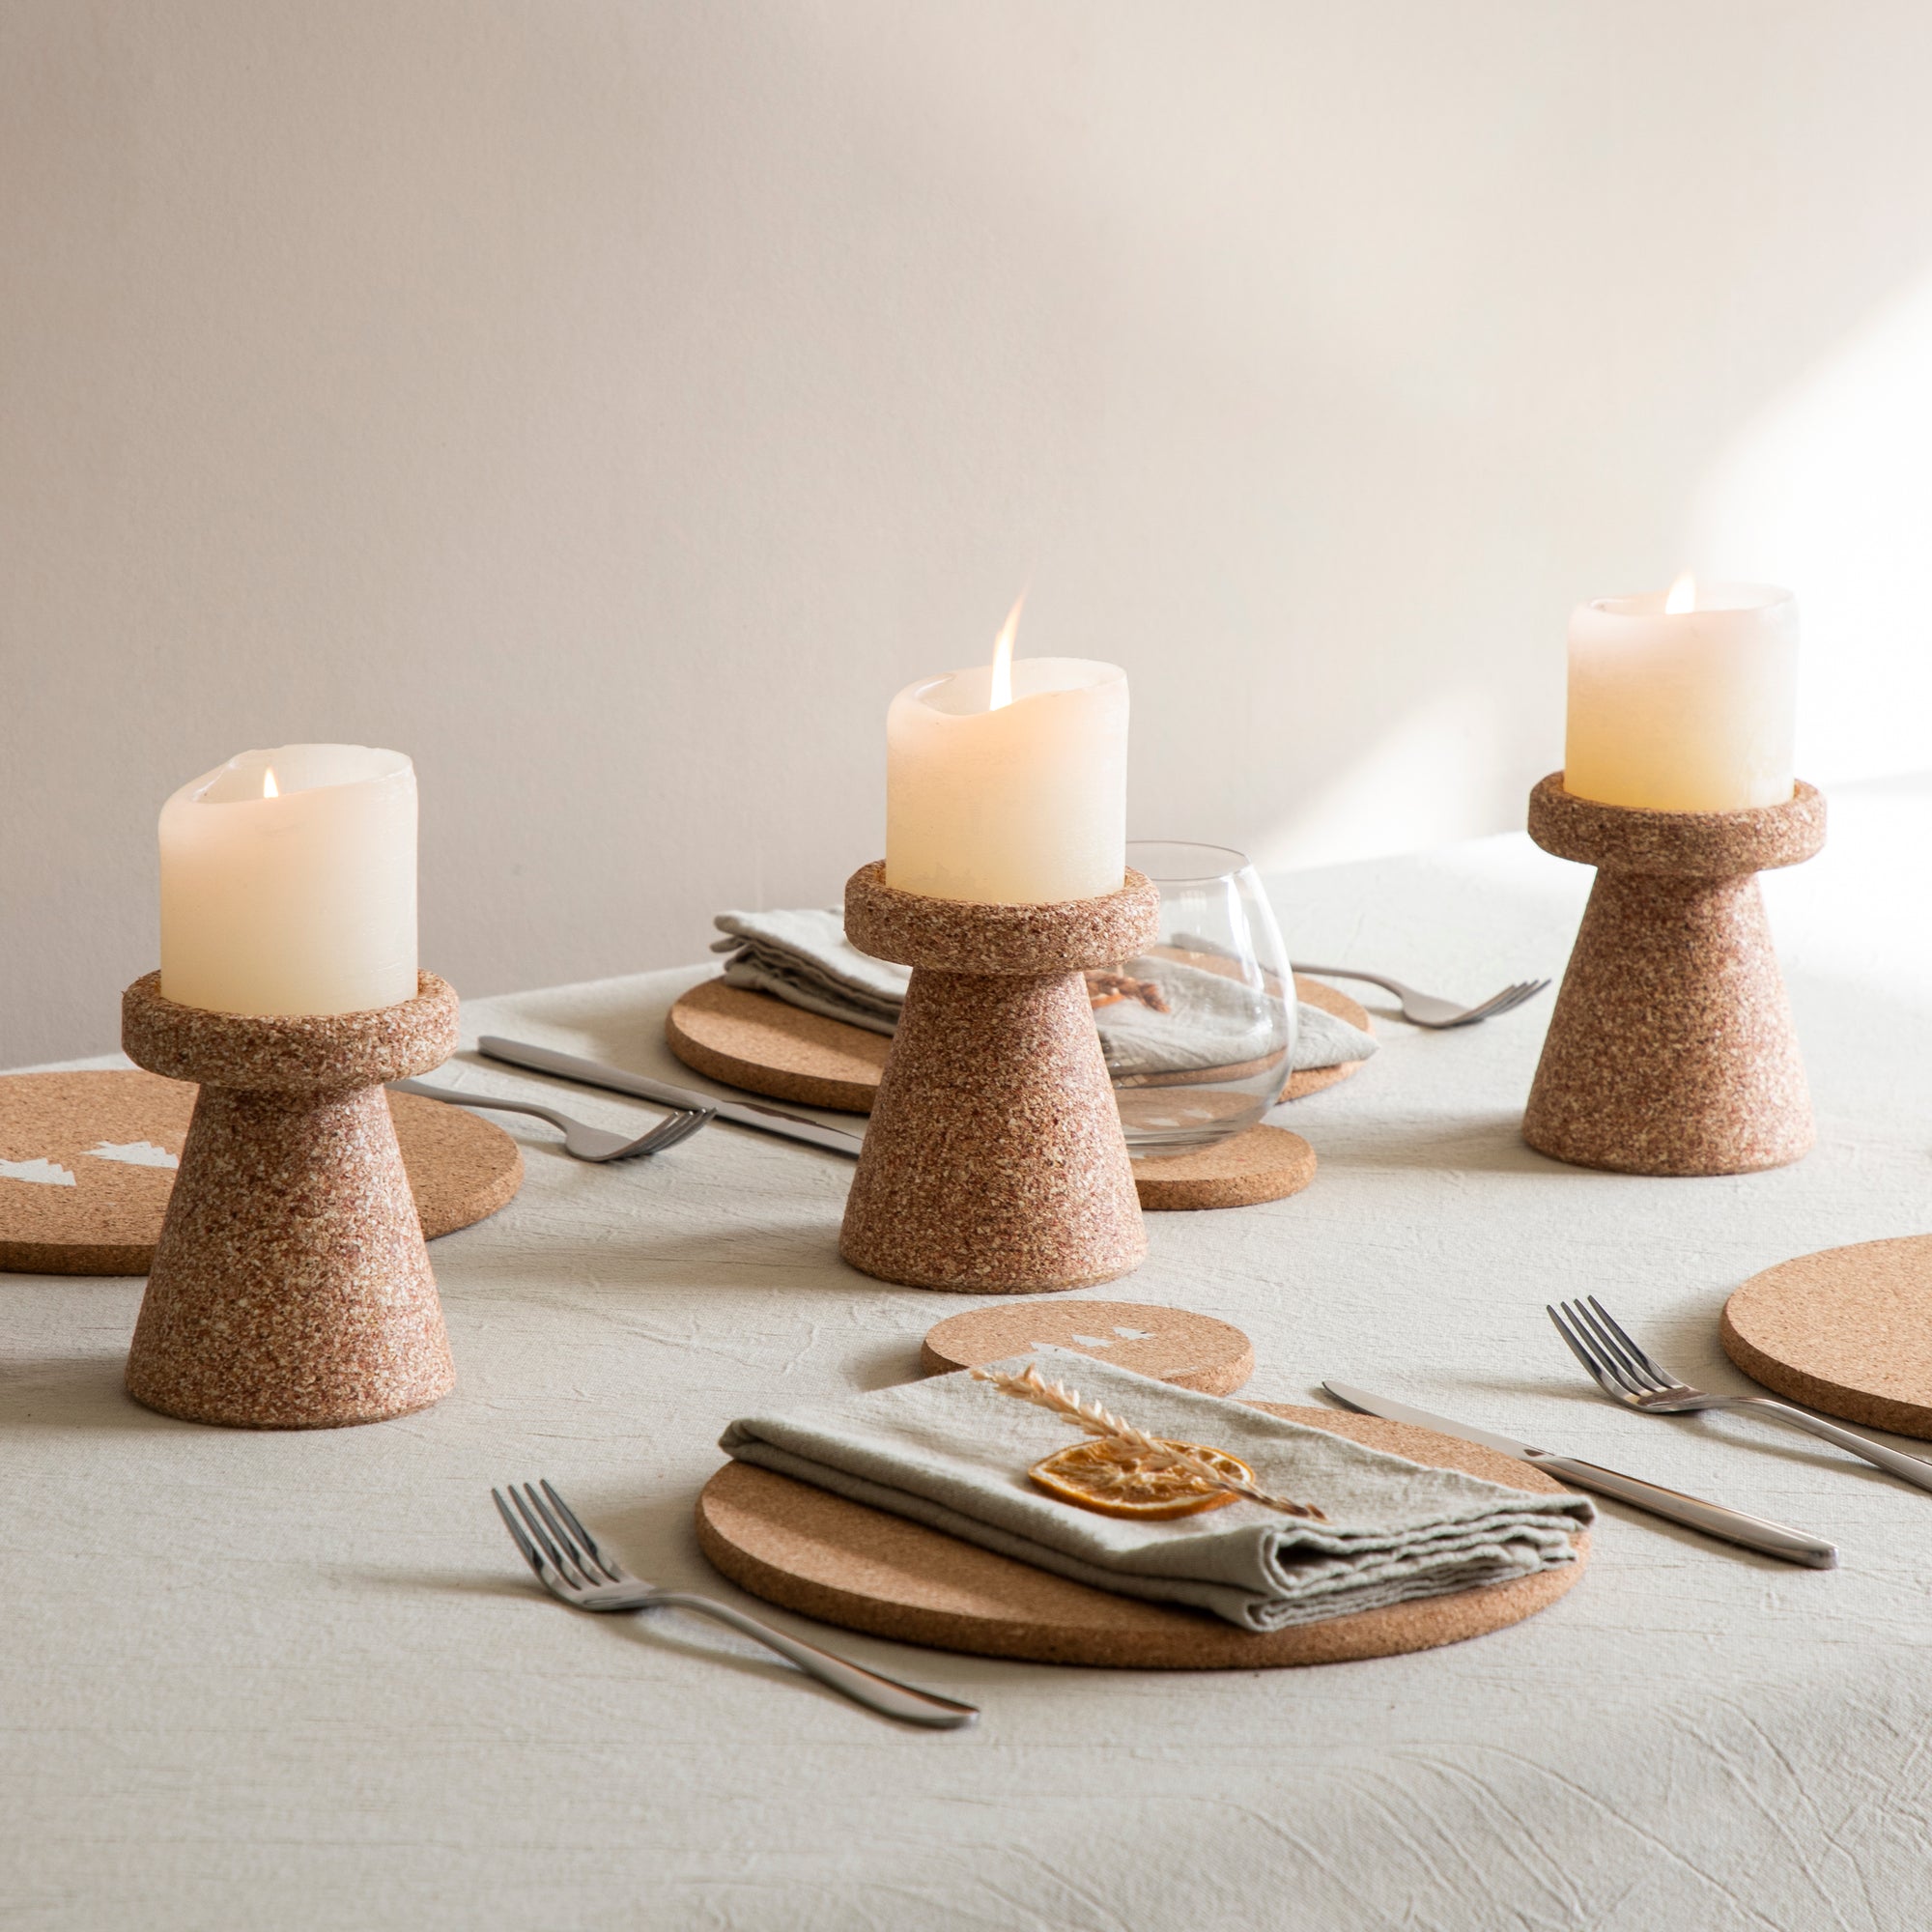 Buy 2 get 1 free - Candle Holders